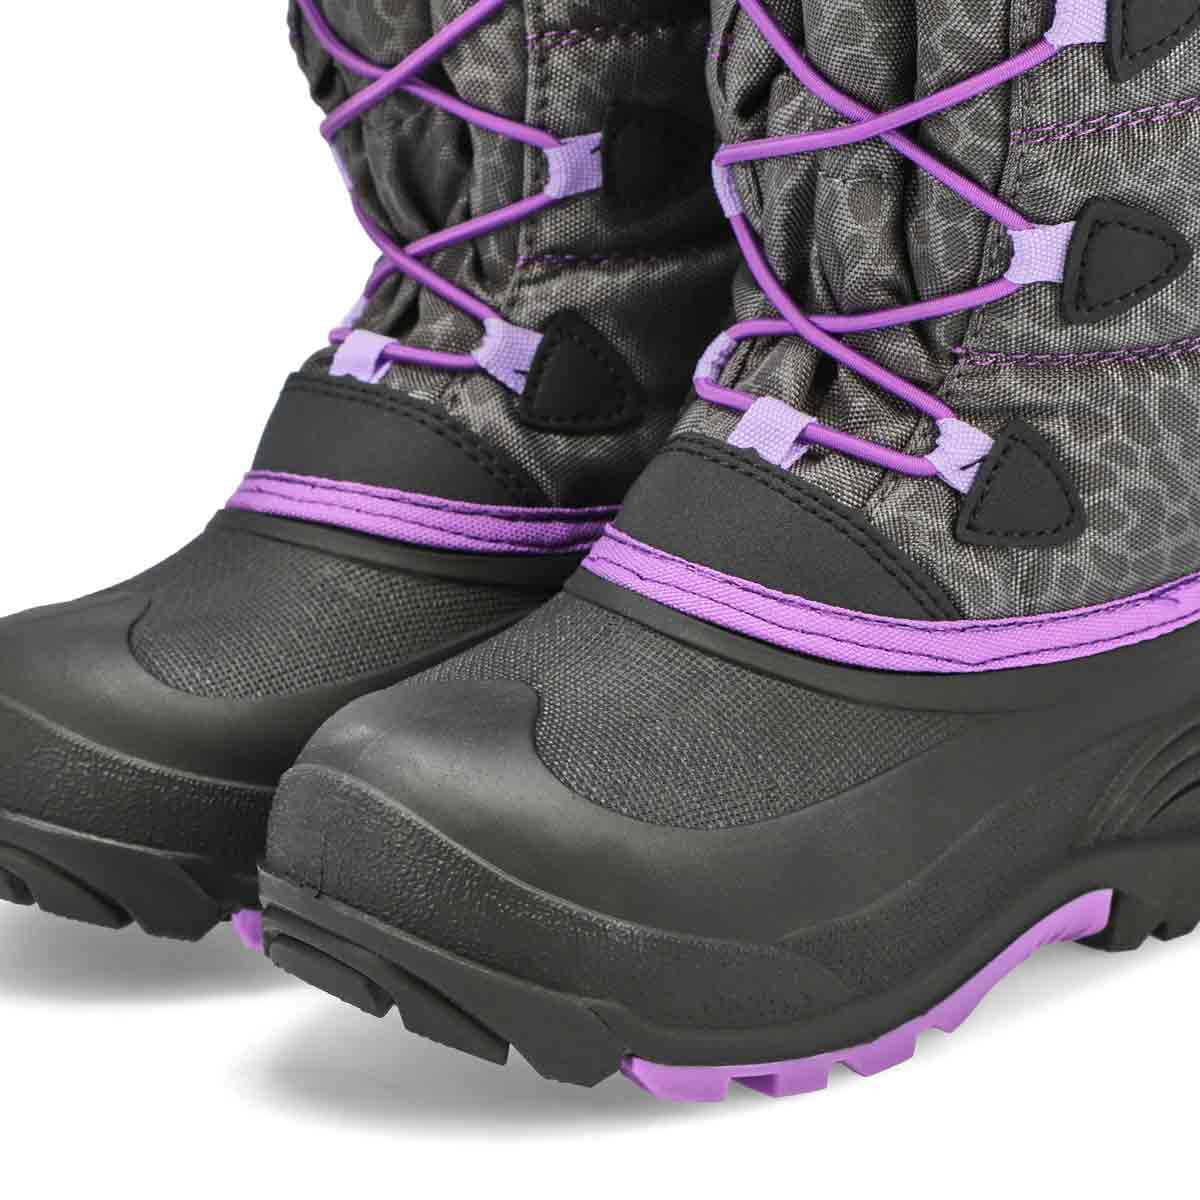 Girls Snowgypsy 3 Winter Boot - Char/Orch